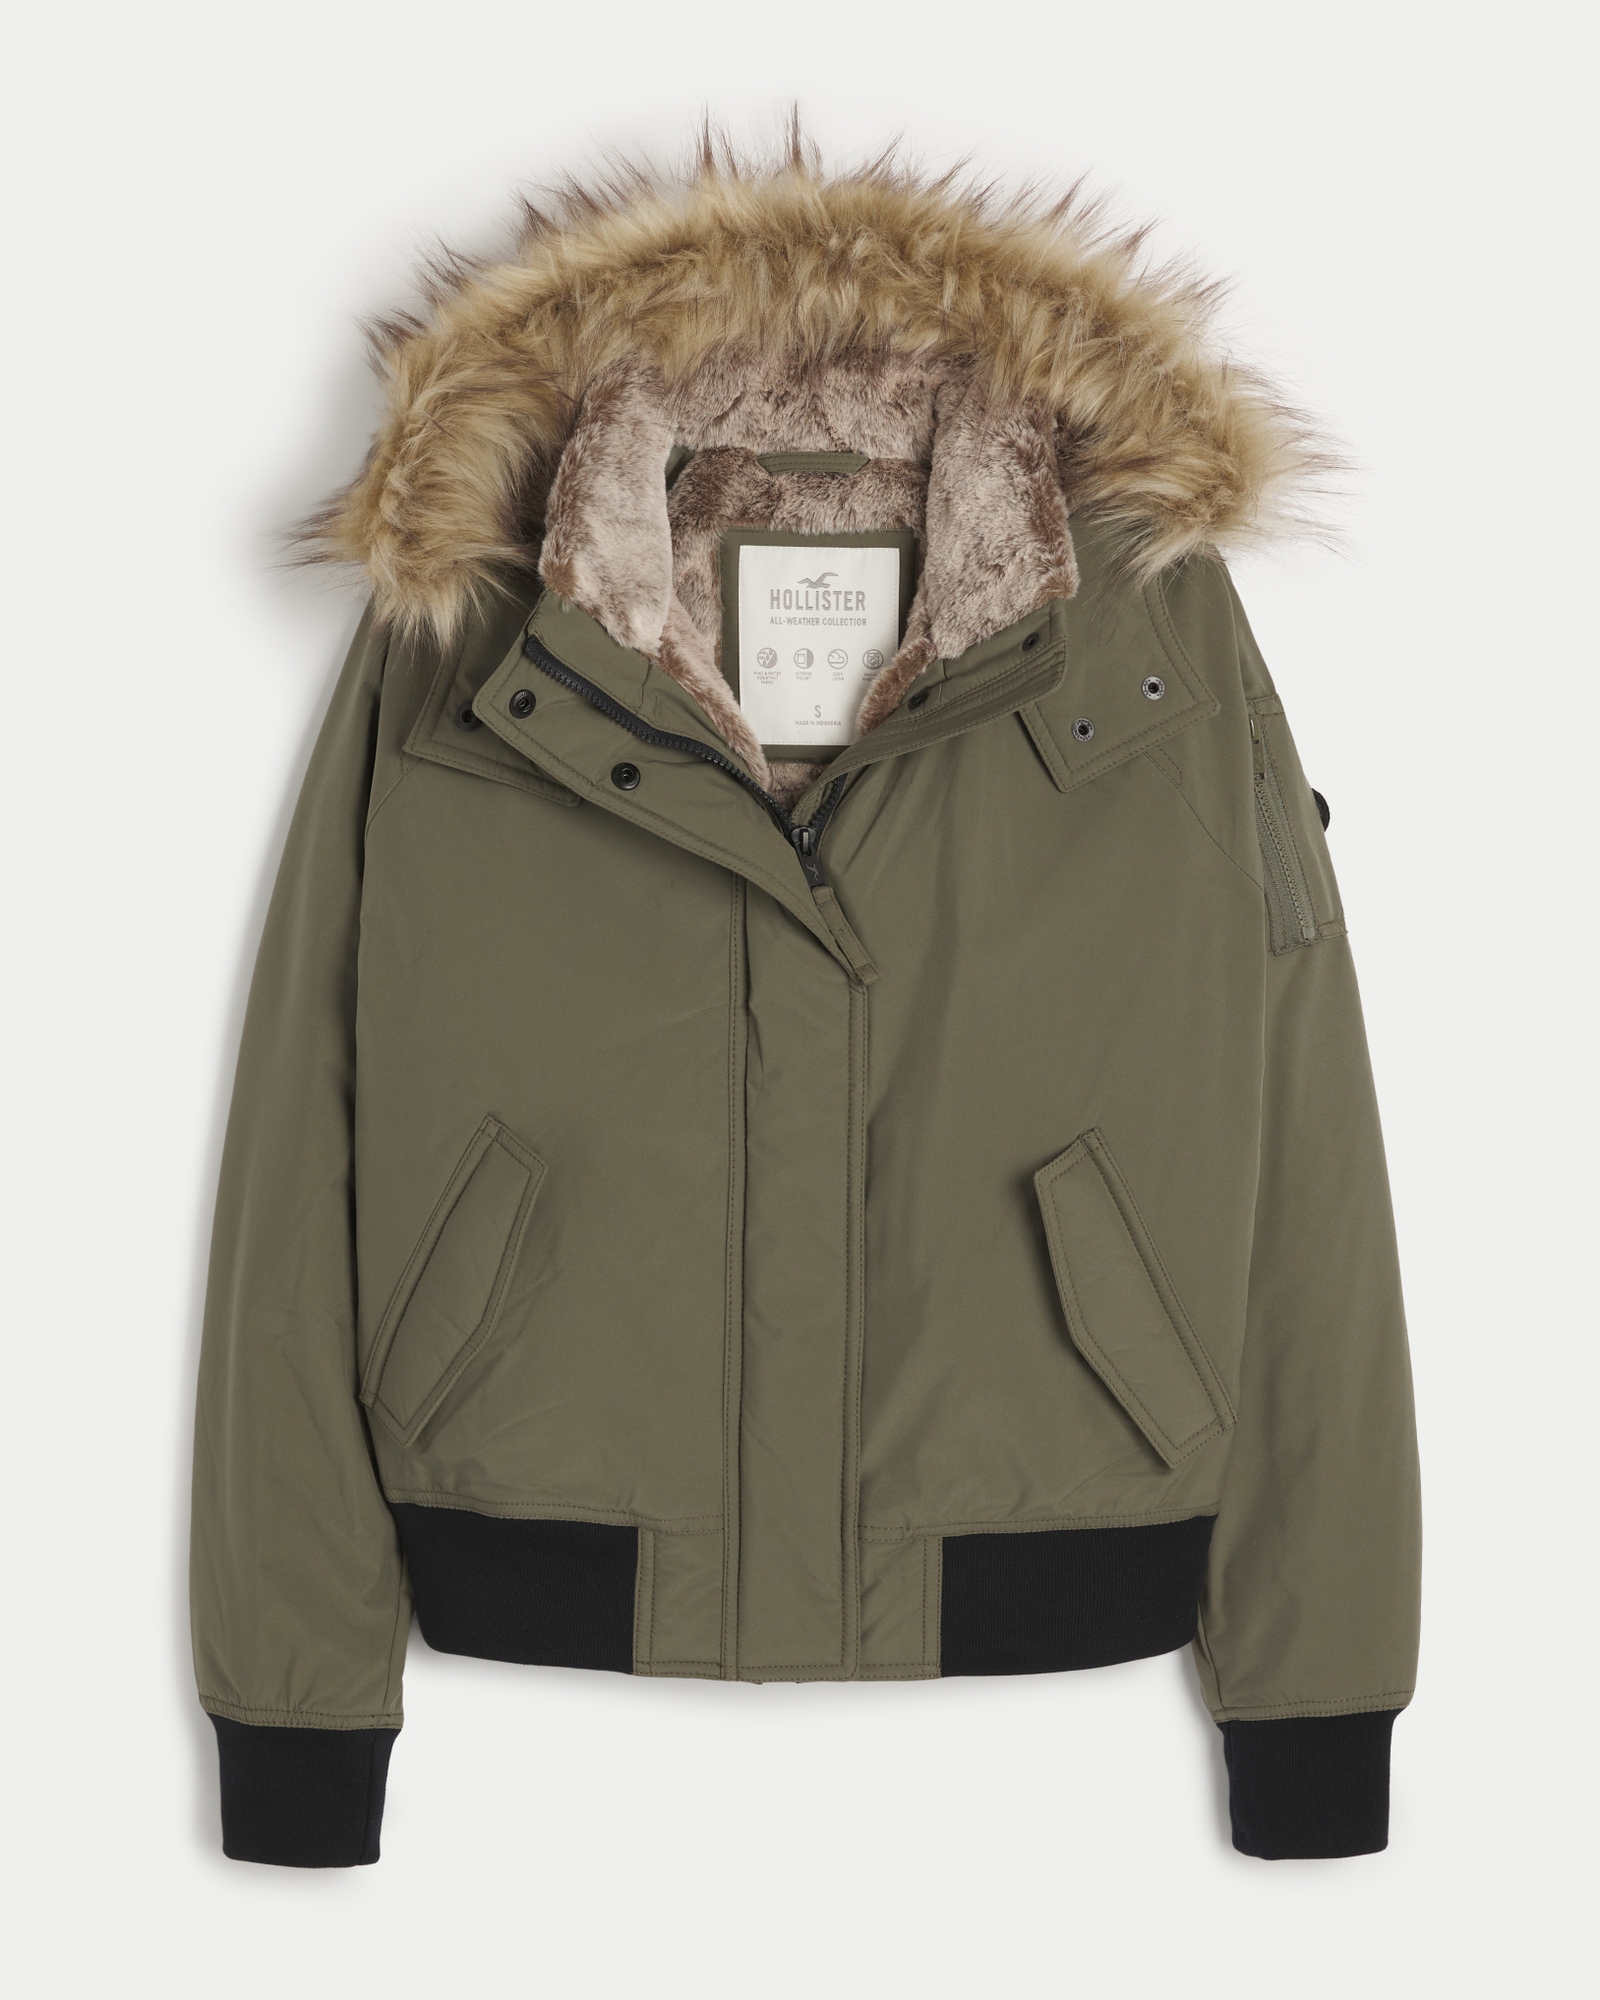 Hollister Womens Jacket with Faux Fur lining sz S Olive Green